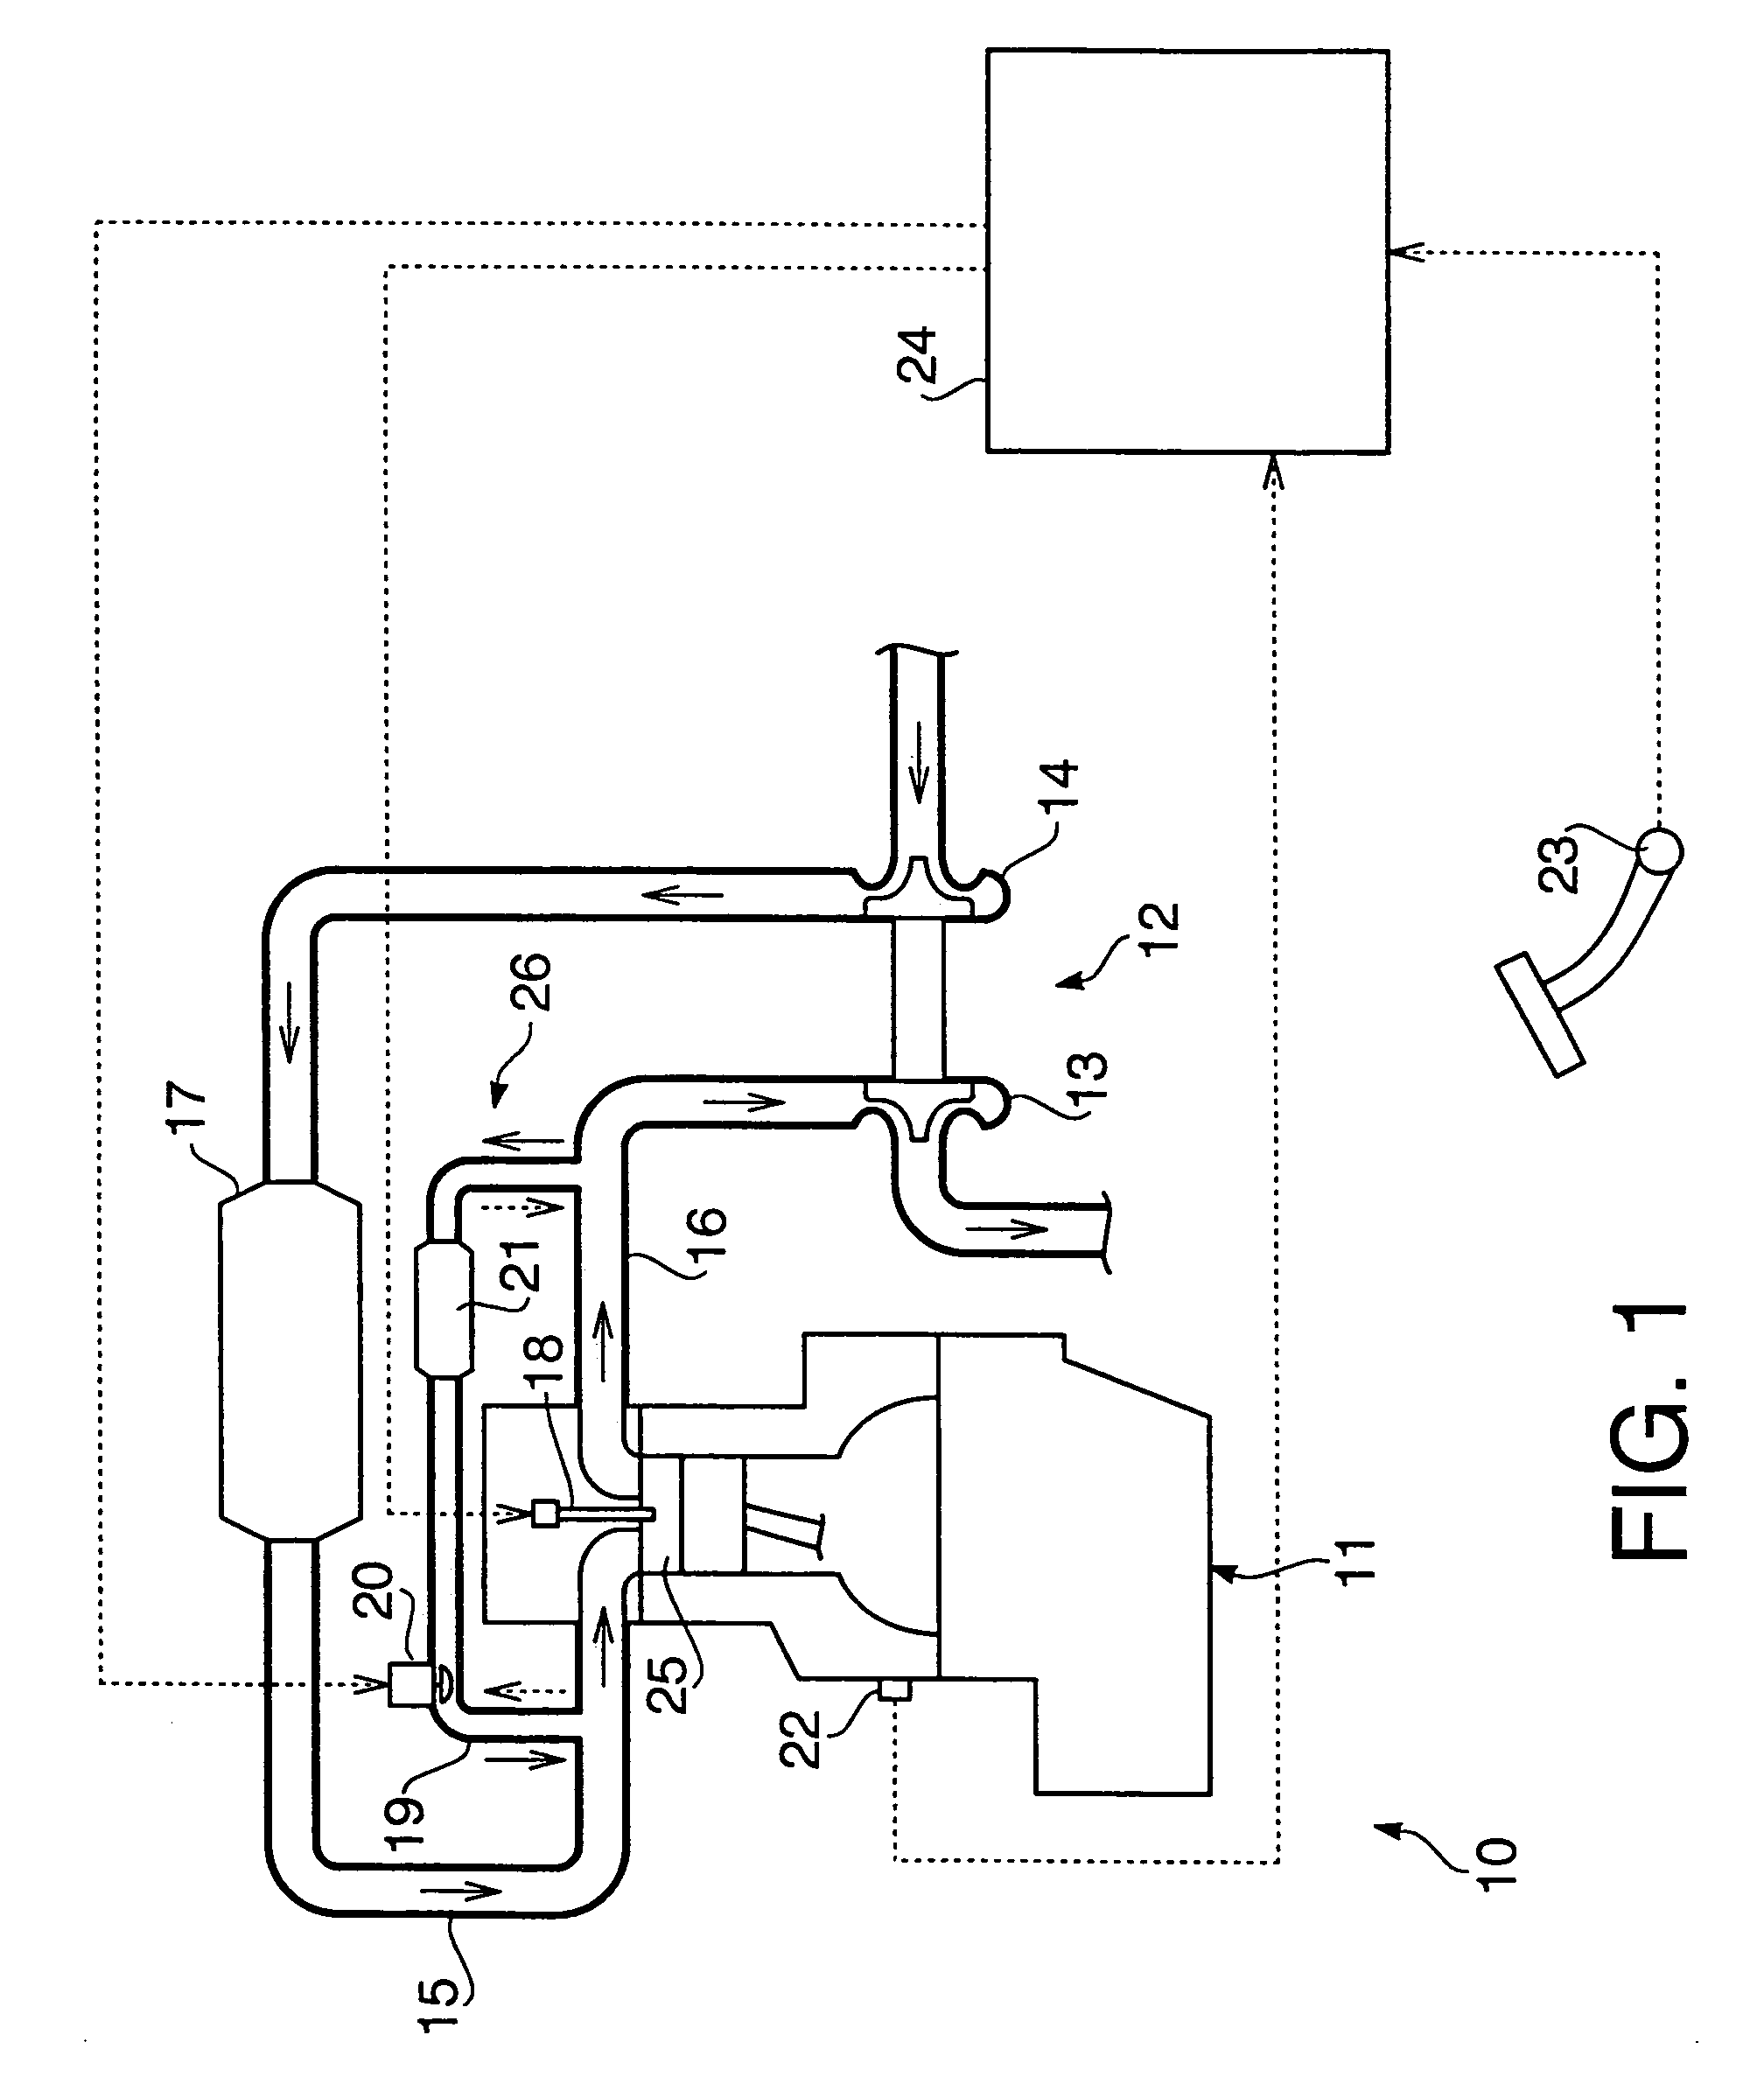 Turbocharged engine and method for preventing surging in compressor